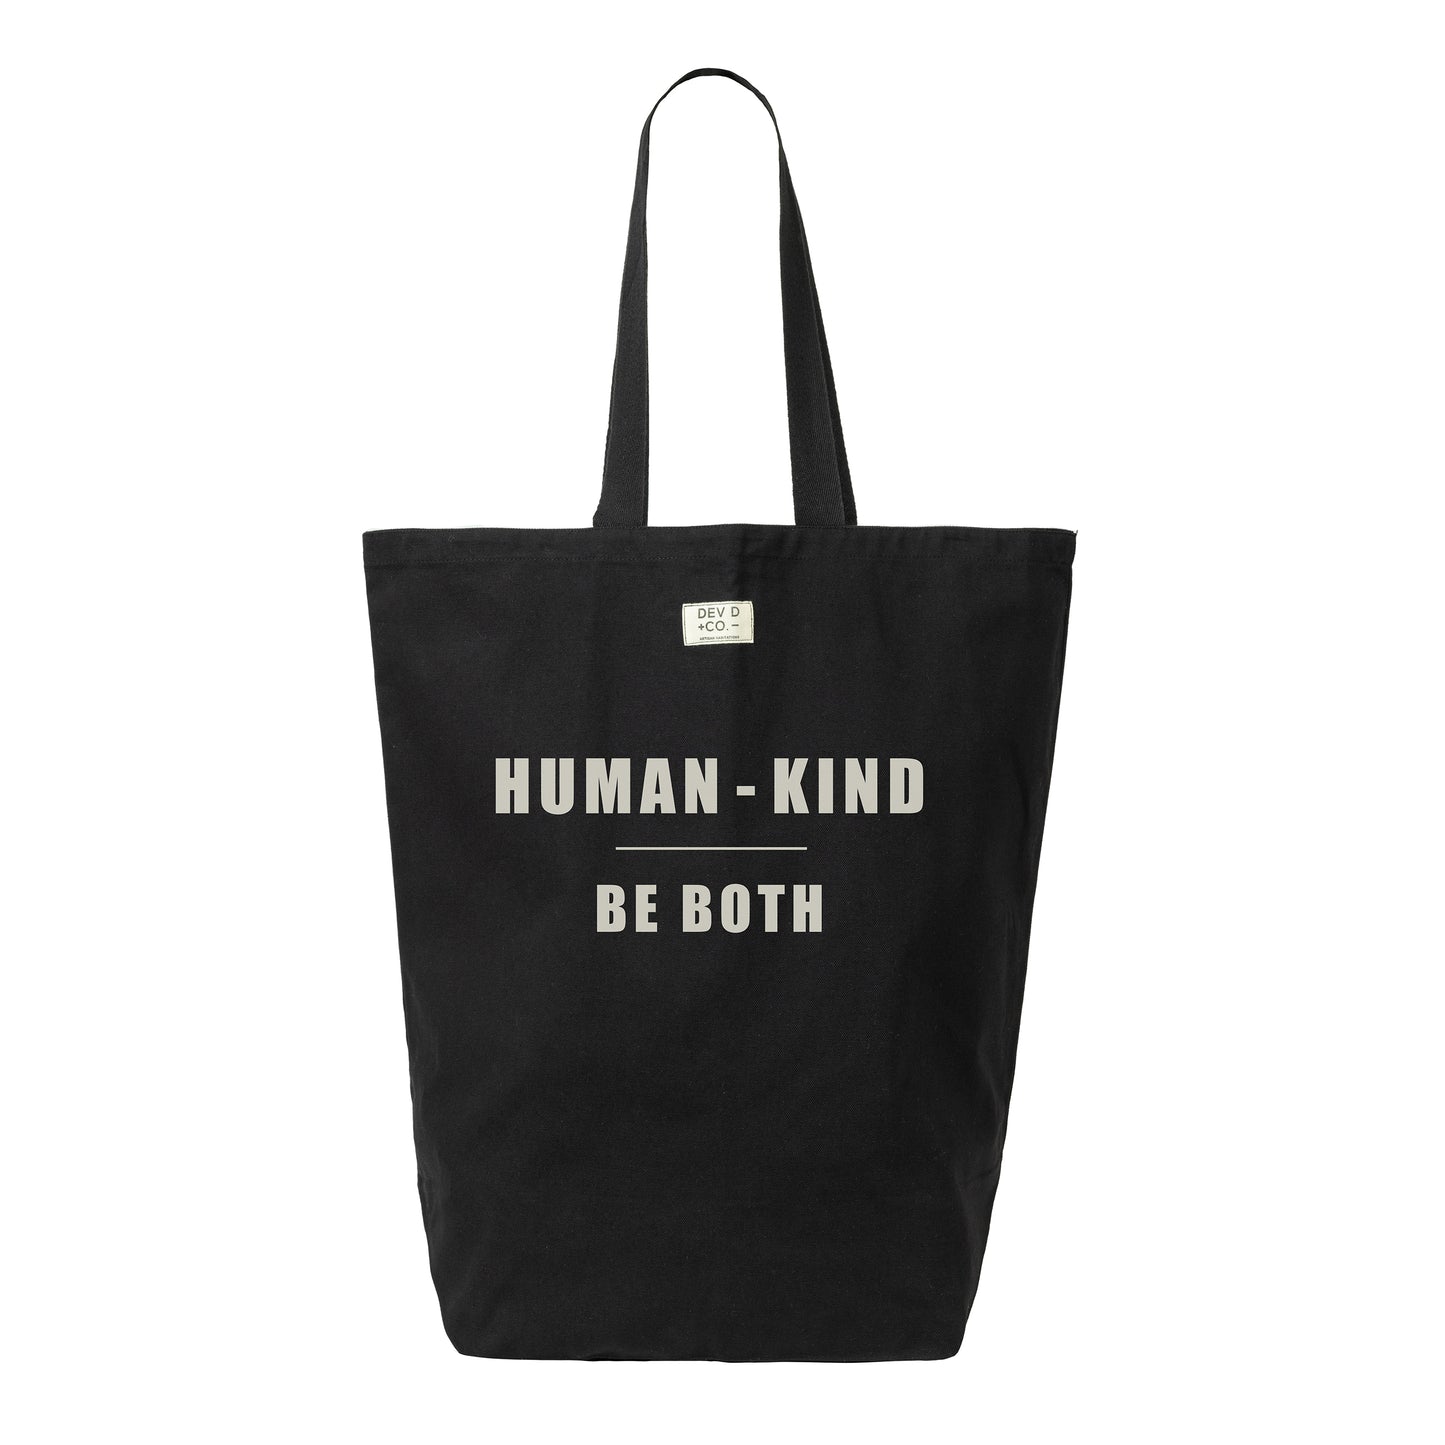 Human Kind - Canvas Tote Bag with Pocket - Large Tote